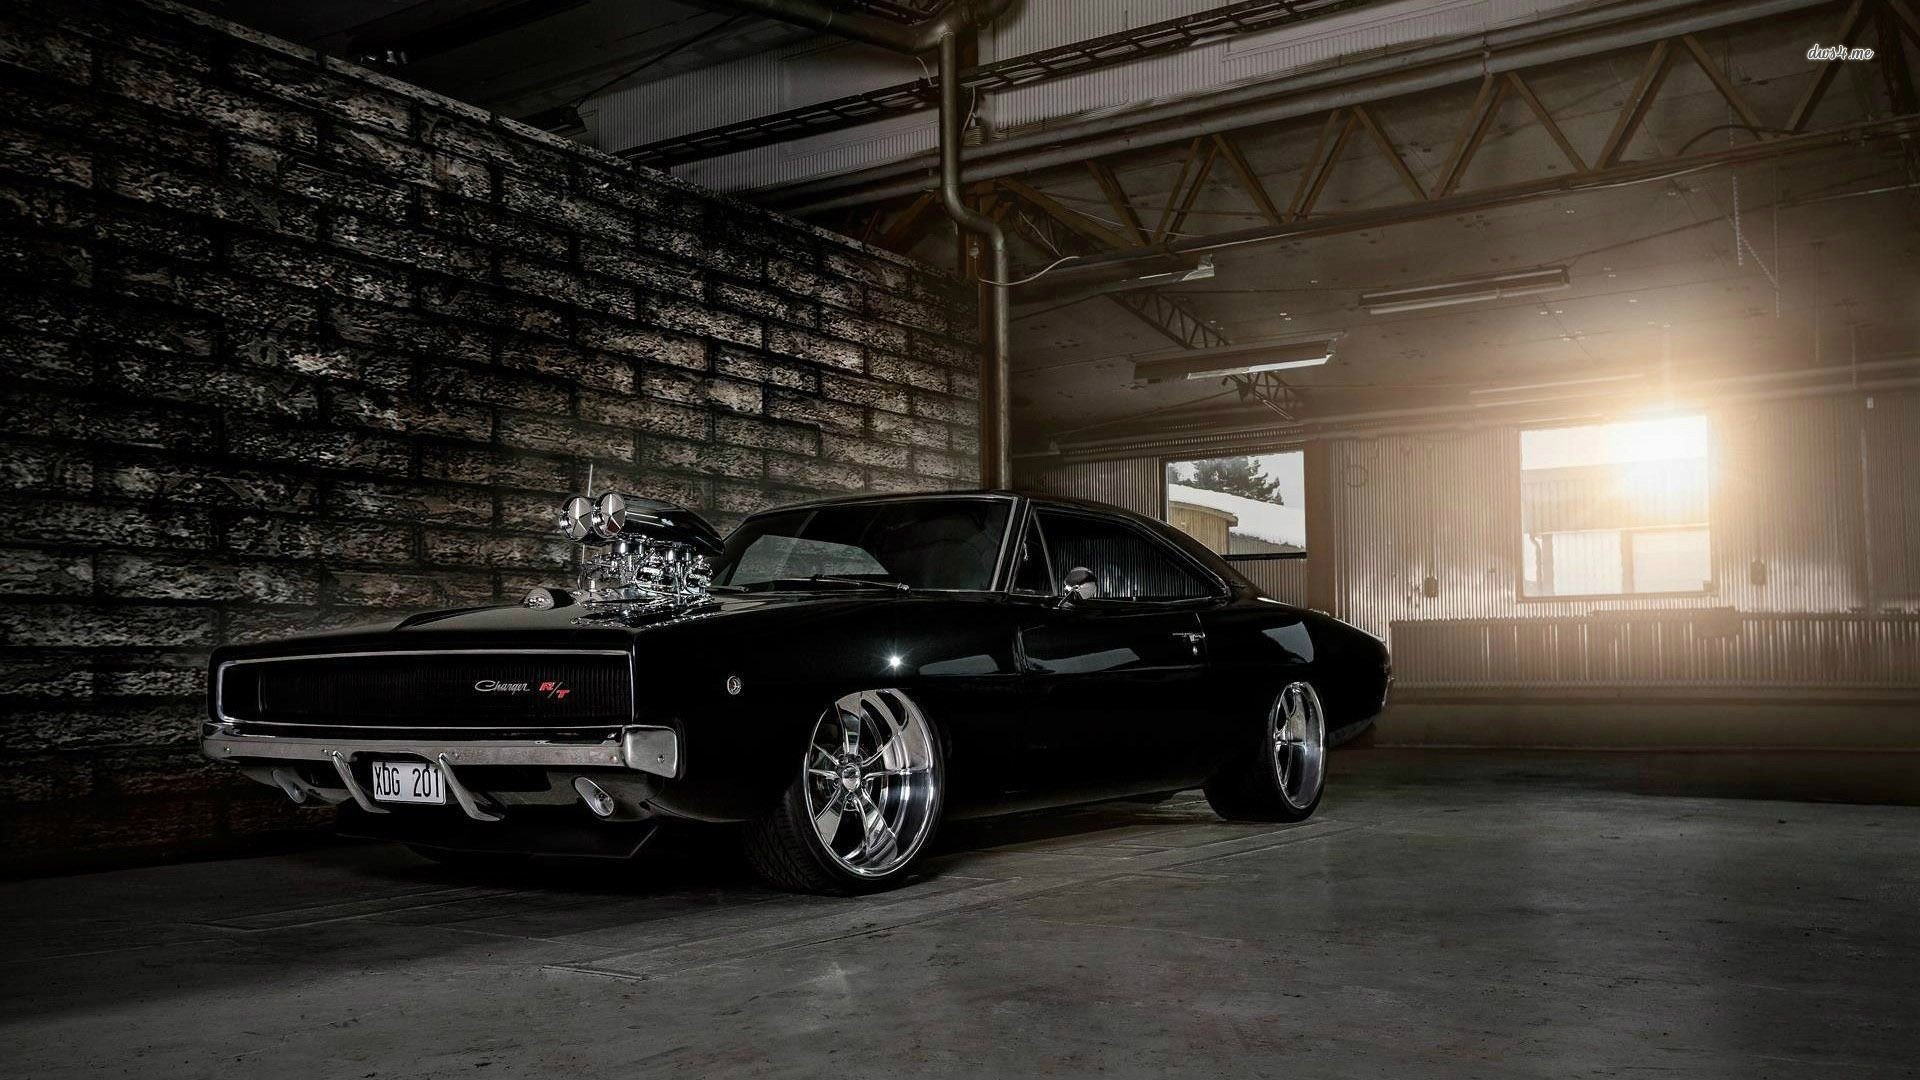 Fast and Furious, Dodge Charger, Car, Muscle cars, 1969 Dodge Charger R T, 1968 Dodge Charger Wallpaper